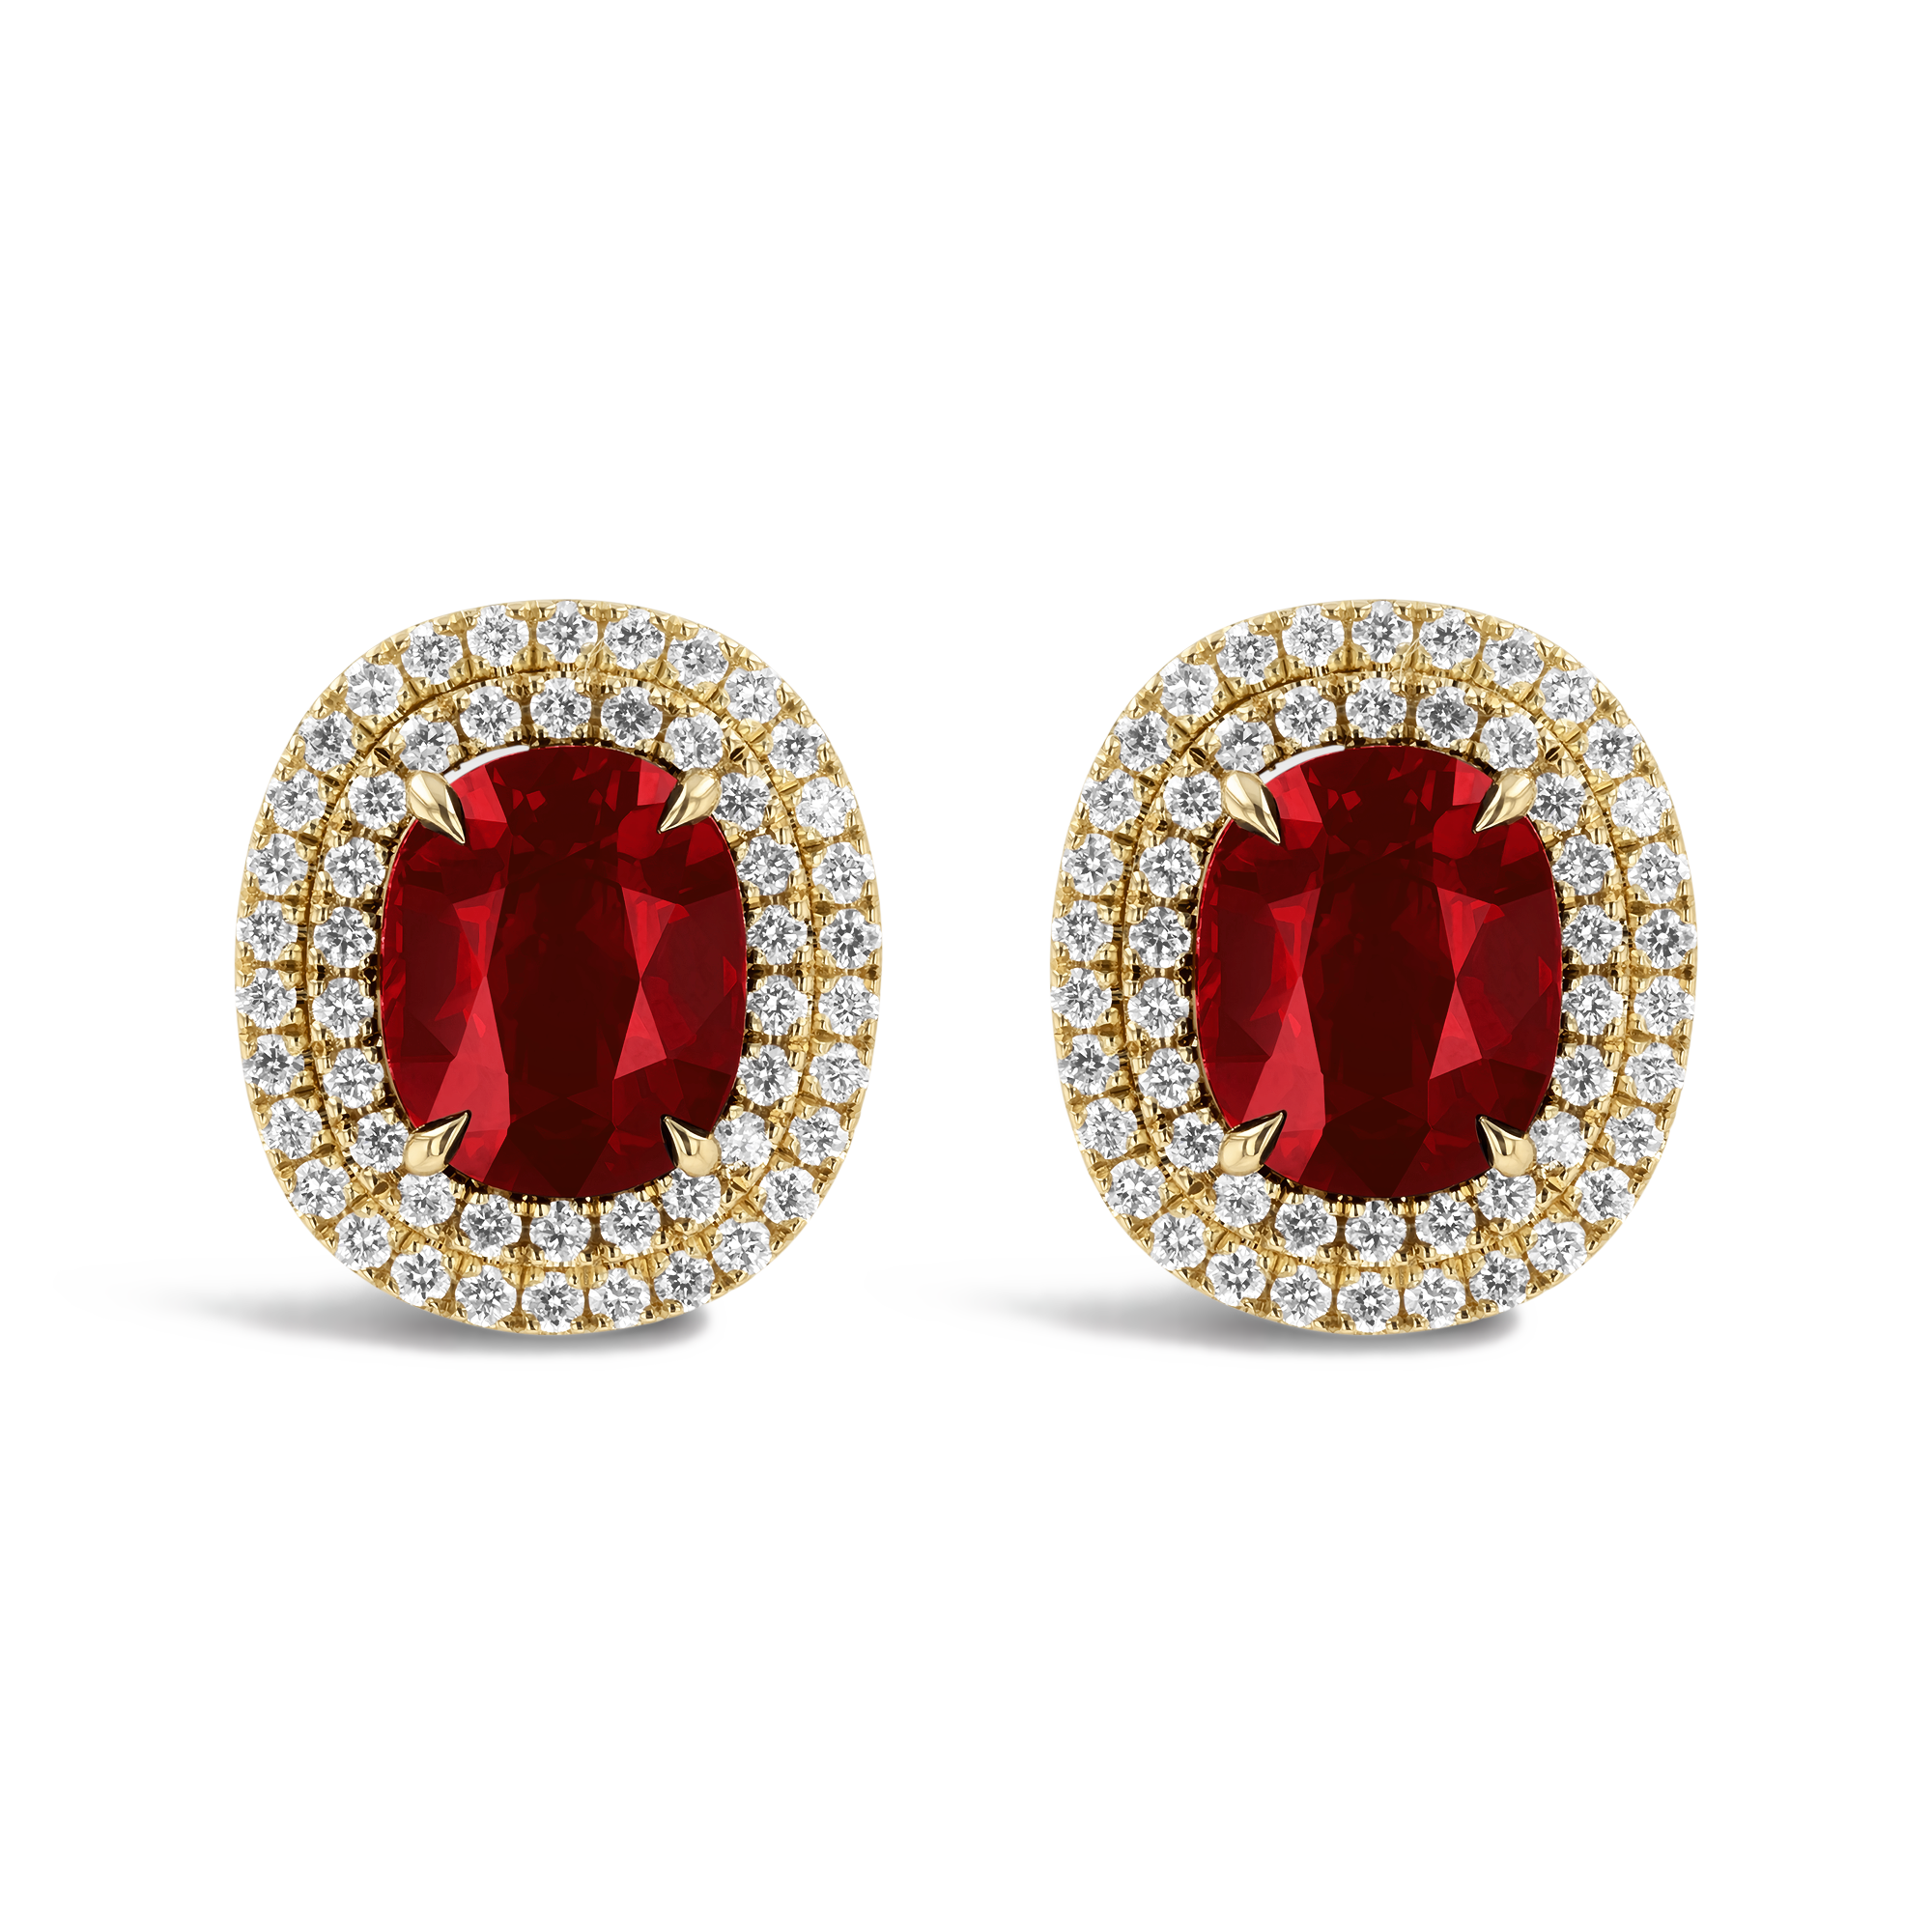 Mozambique Ruby Cluster Earrings with Diamond Halo Oval Cut, Four Claw Set_1